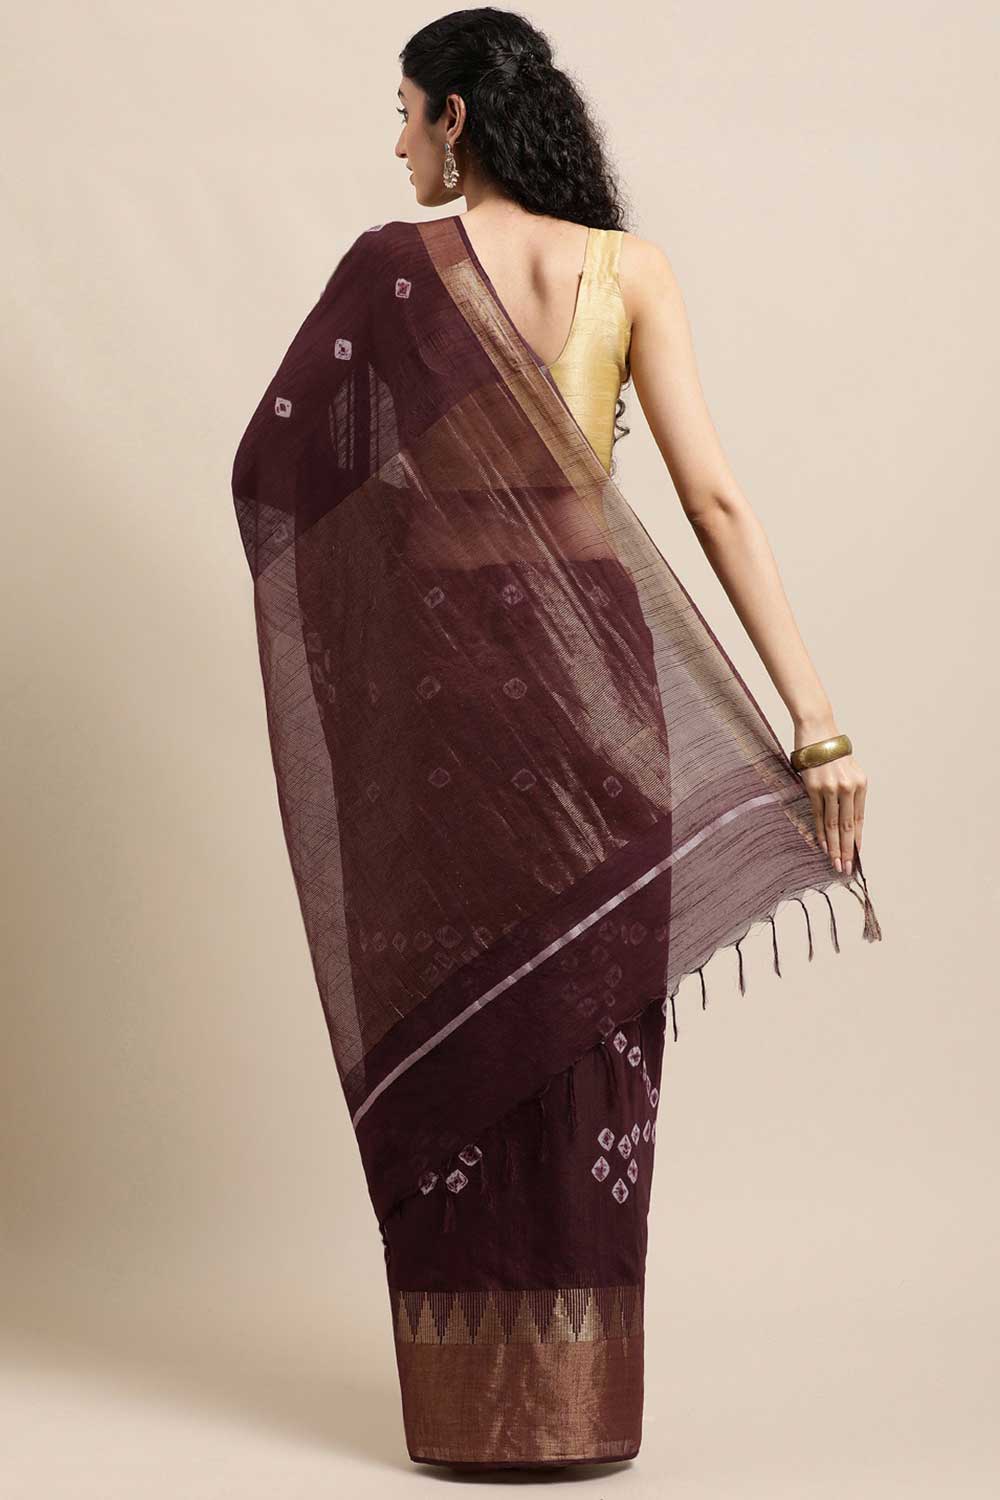 Shop Niti Dark Brown Zari Woven Blended Silk One Minute Saree at best offer at our  Store - One Minute Saree